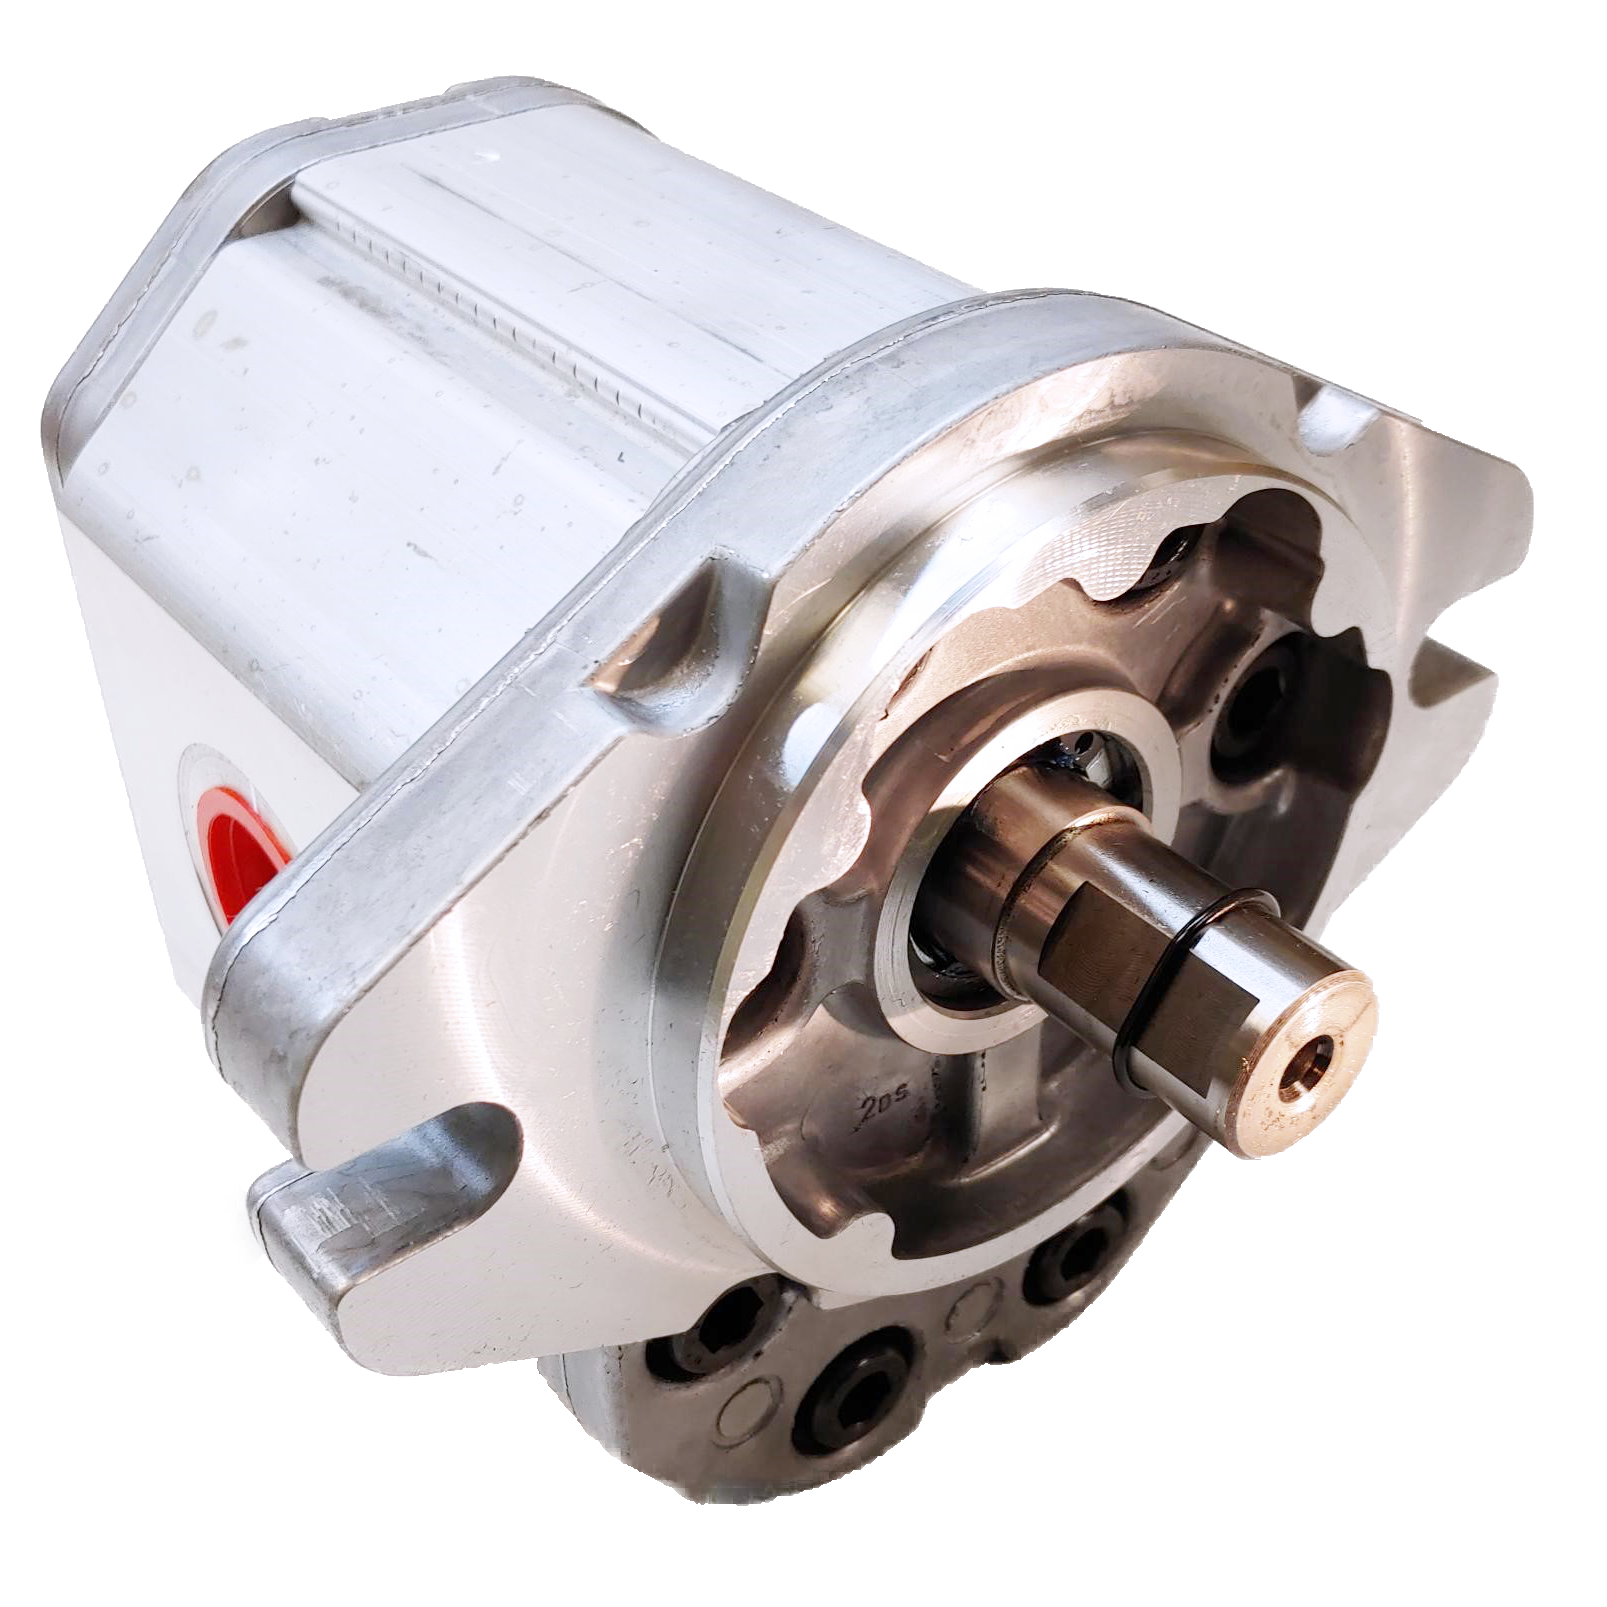 ALM3A-R-94-S1-E4 : Marzocchi Gear Motor, Bidirectional, 61cc, 2755psi rated, 2800RPM, 1.25" Code 61 ports, 9T 16/32DP Splined Shaft